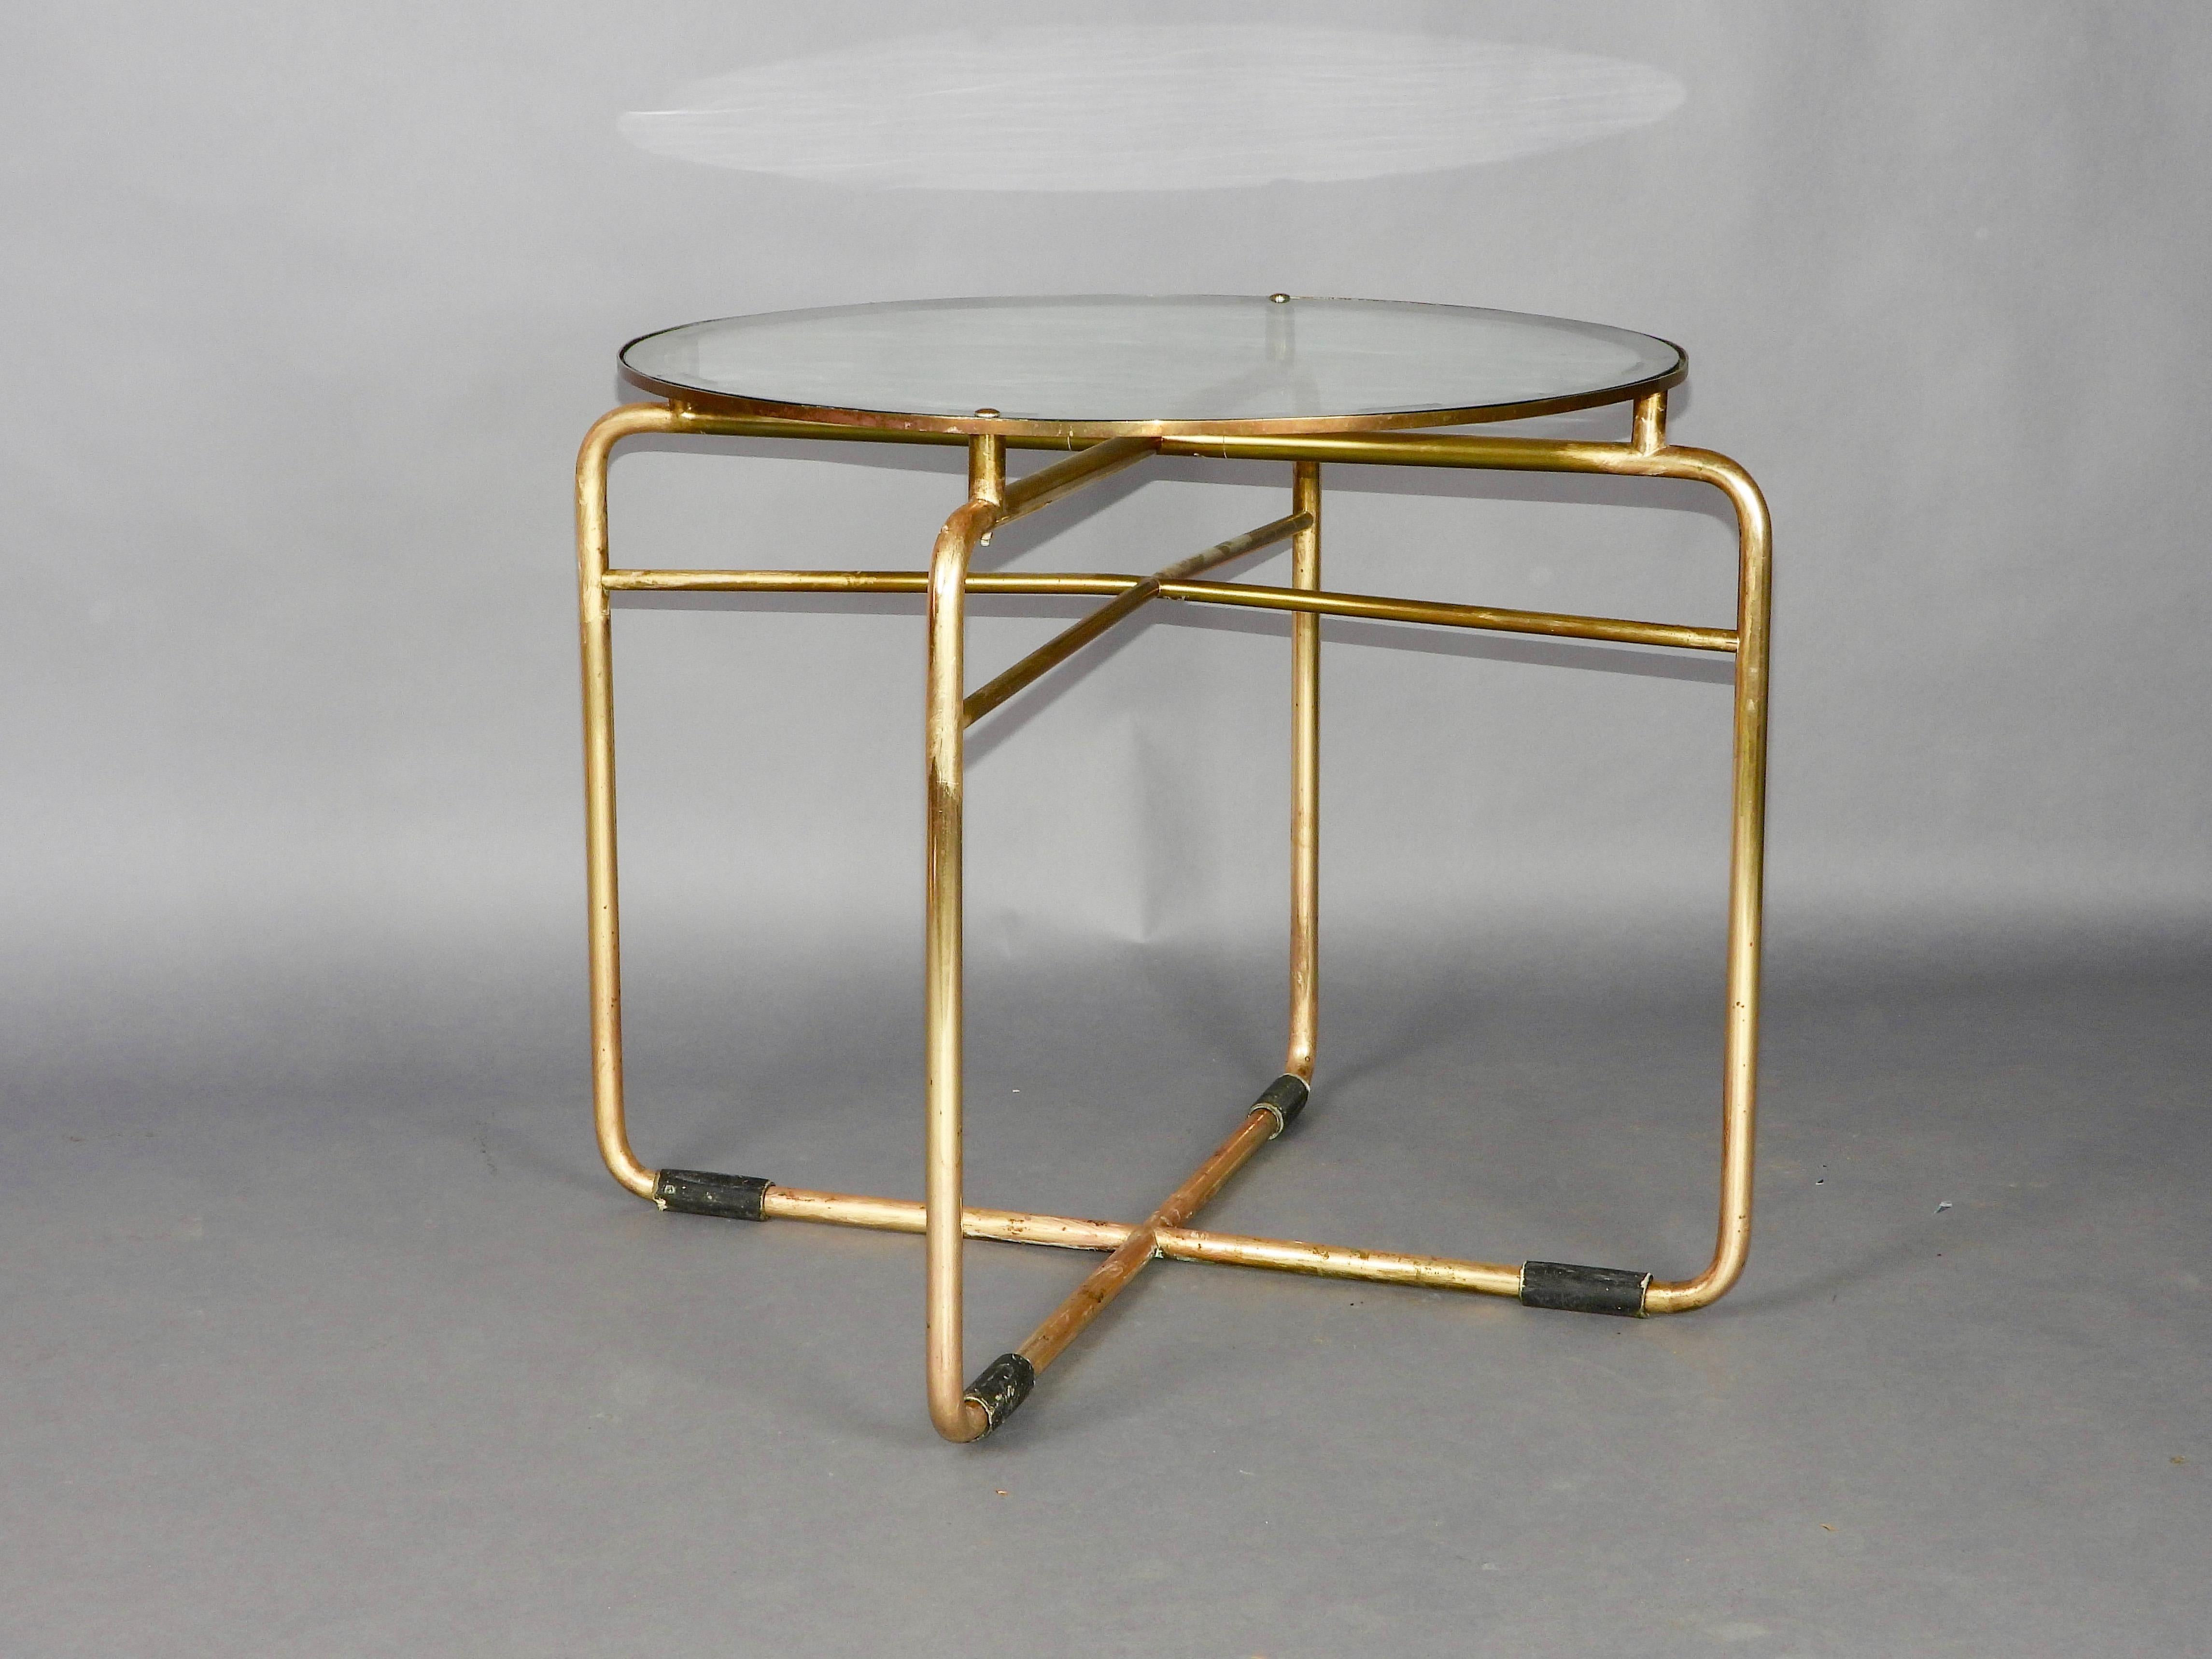 tubular art deco pedestal table with golden patina , little damage on the top with the glass see photo